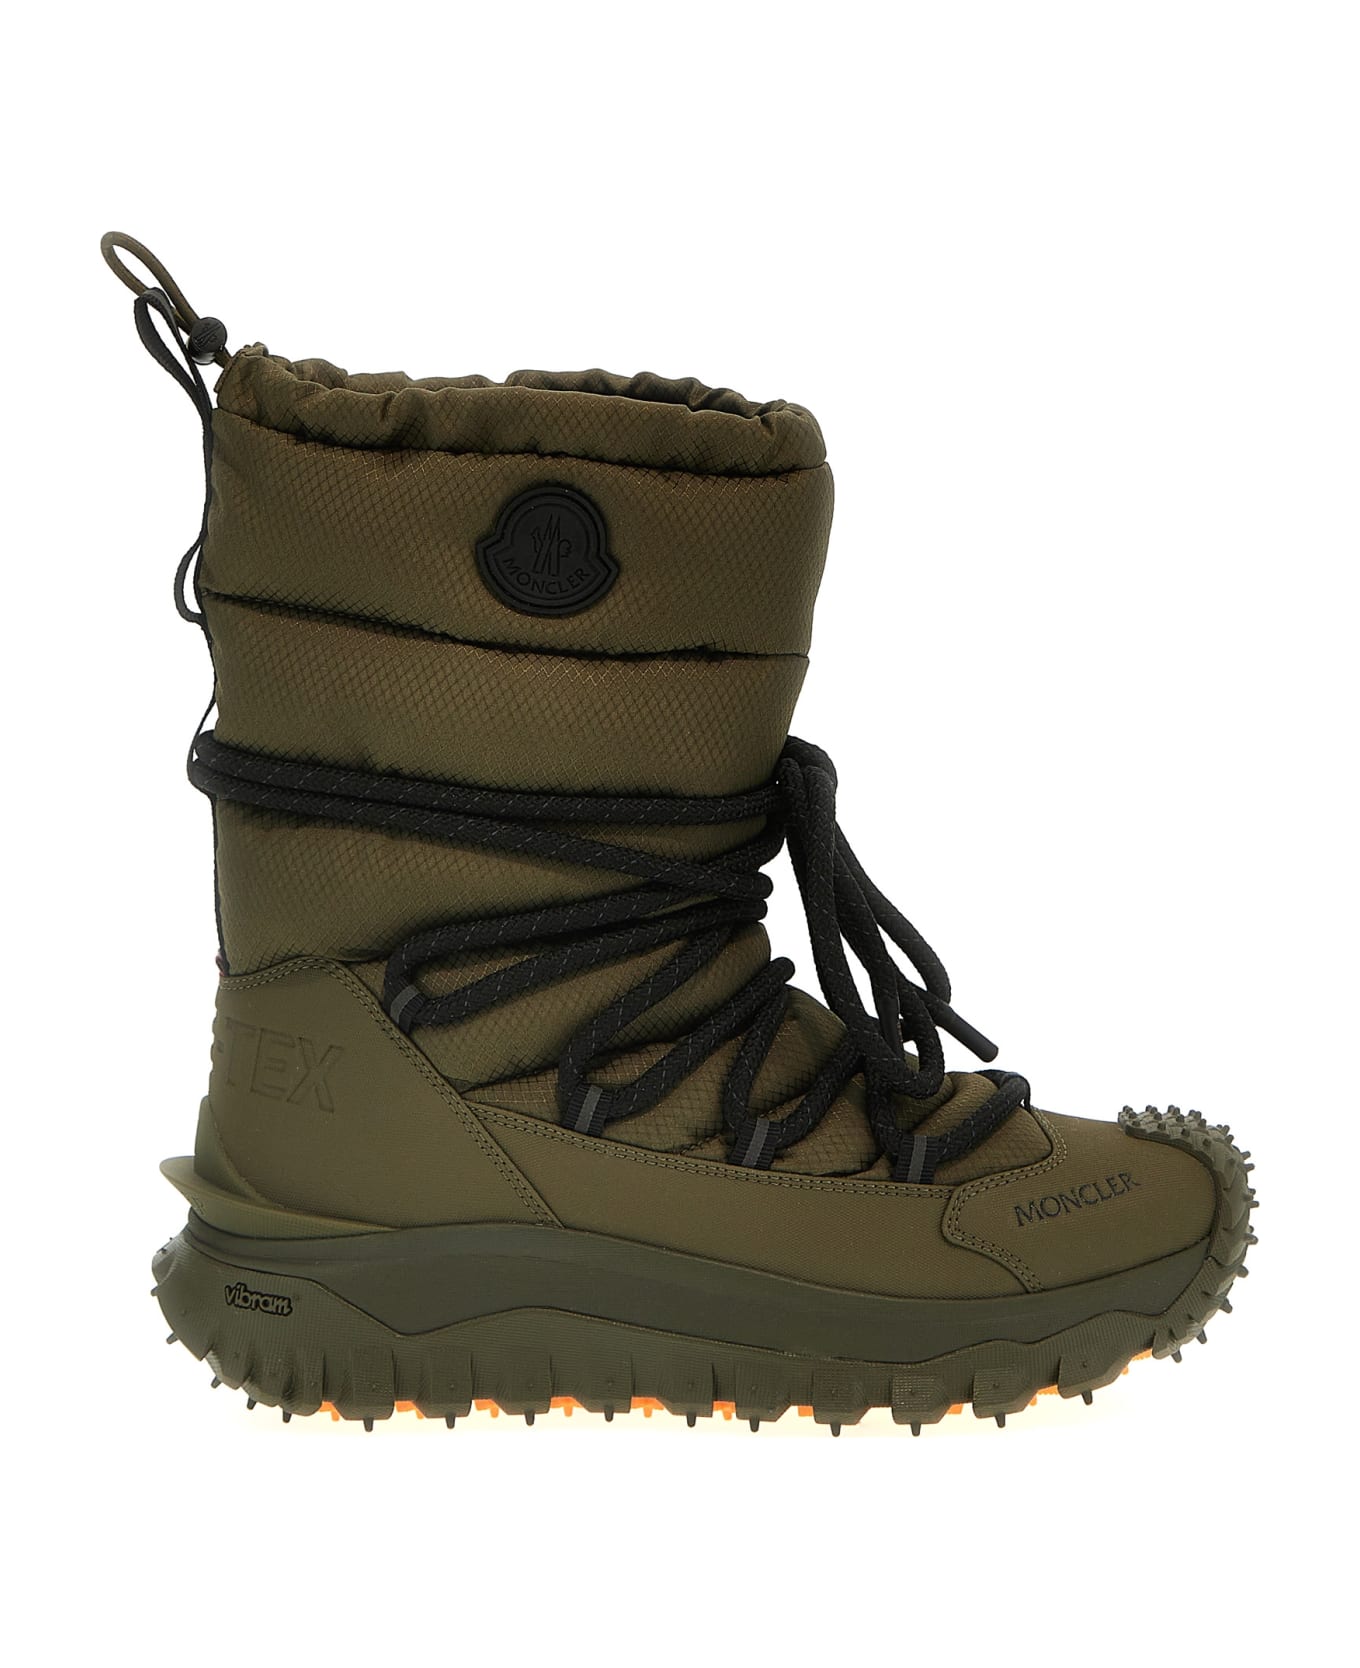 Moncler 'trailgrip Après' Ankle Boots - Green ブーツ